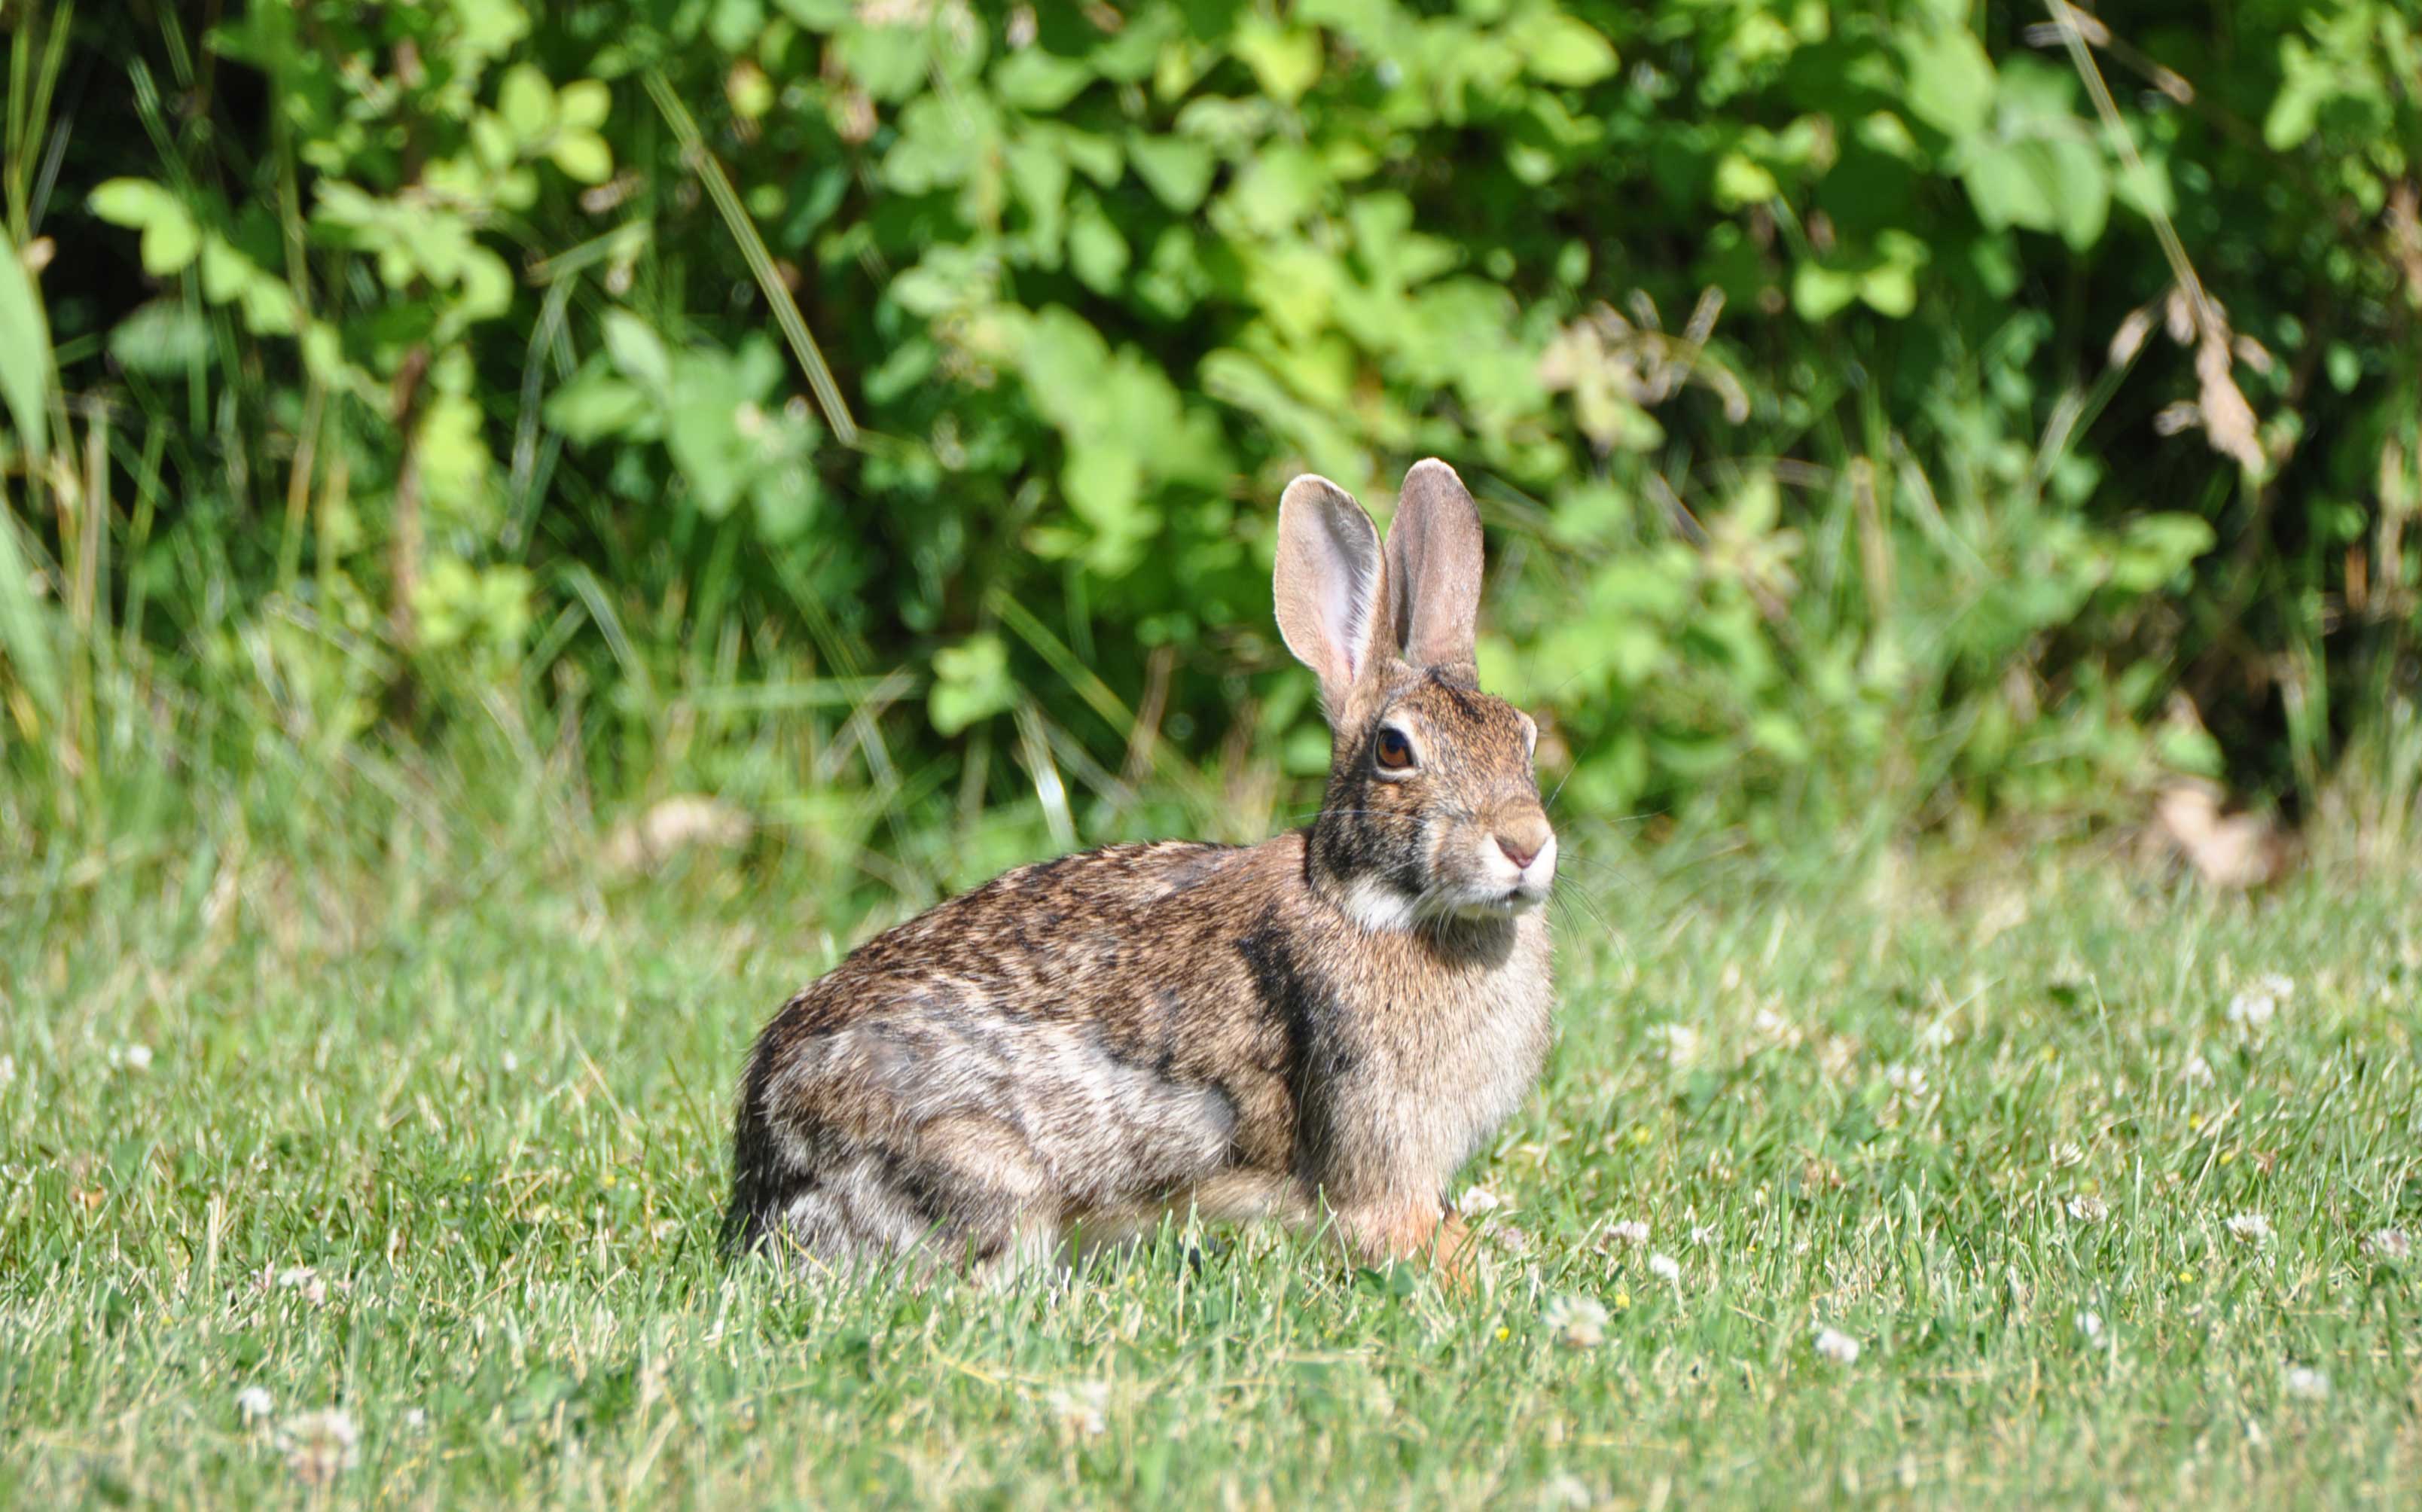 A rabbit sitting in the grass.